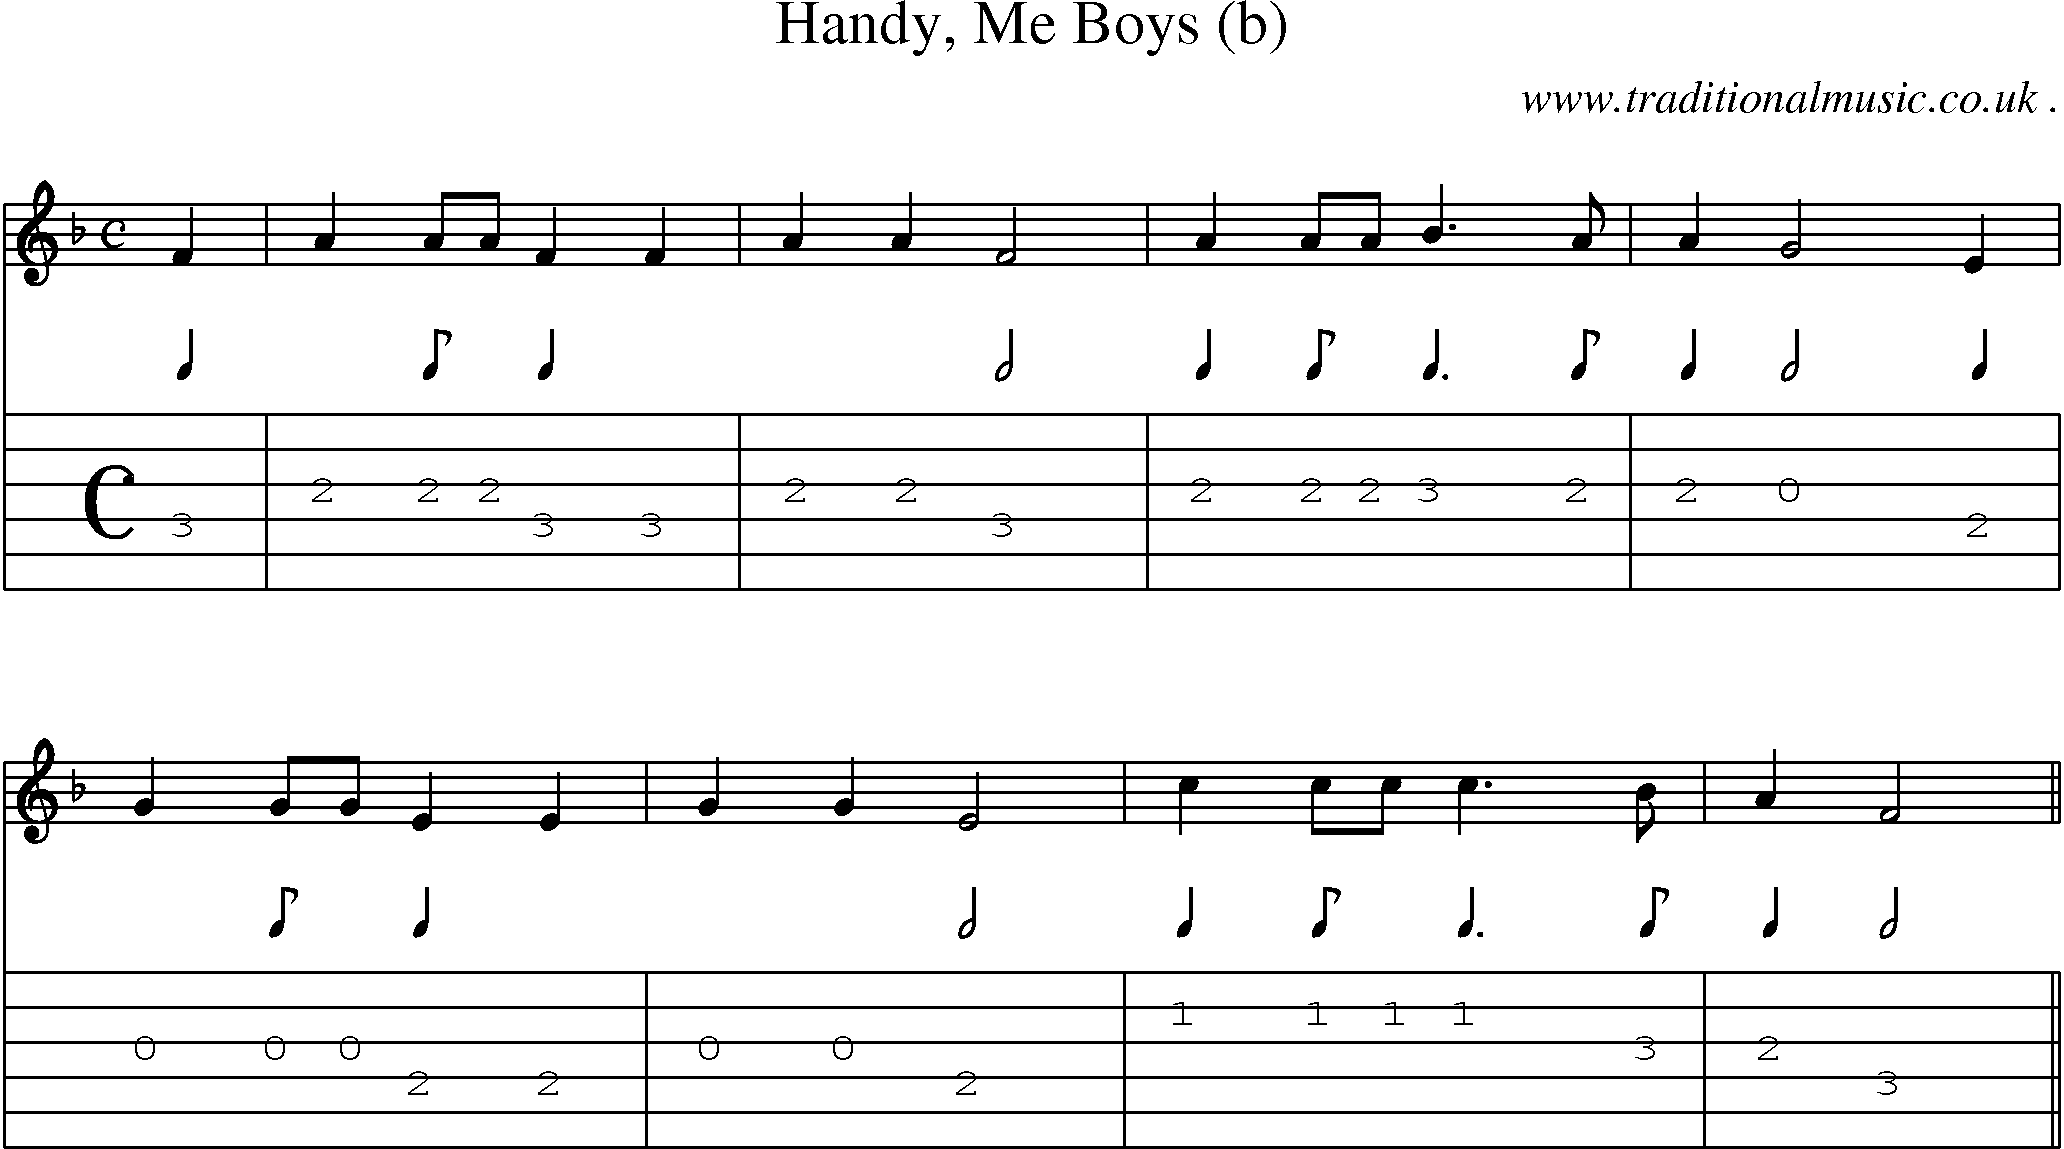 Sheet-Music and Guitar Tabs for Handy Me Boys (b)